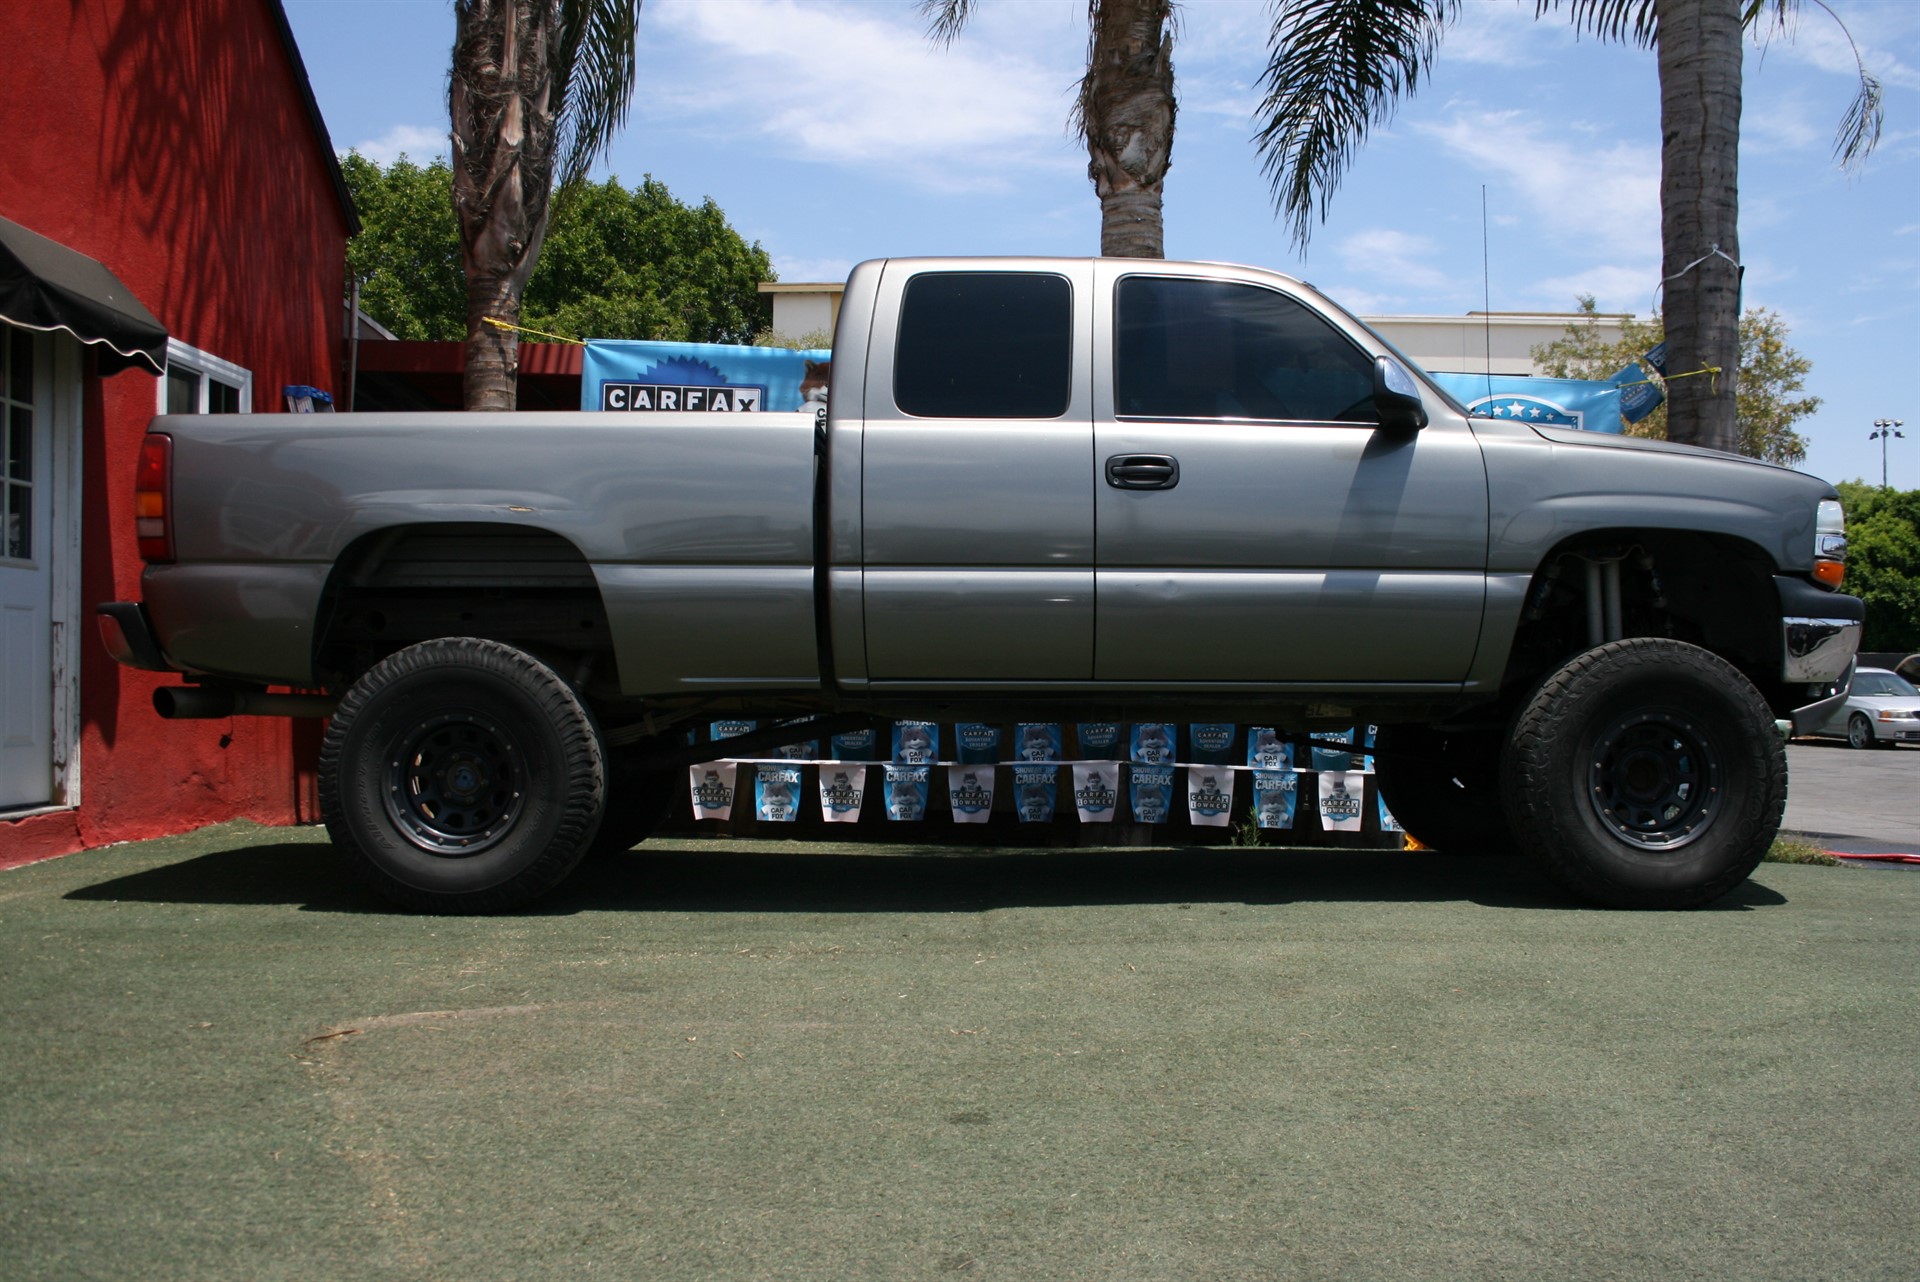 2002 Chevrolet Silverado LS- only 111k Miles- Lifted and in amazing shape!